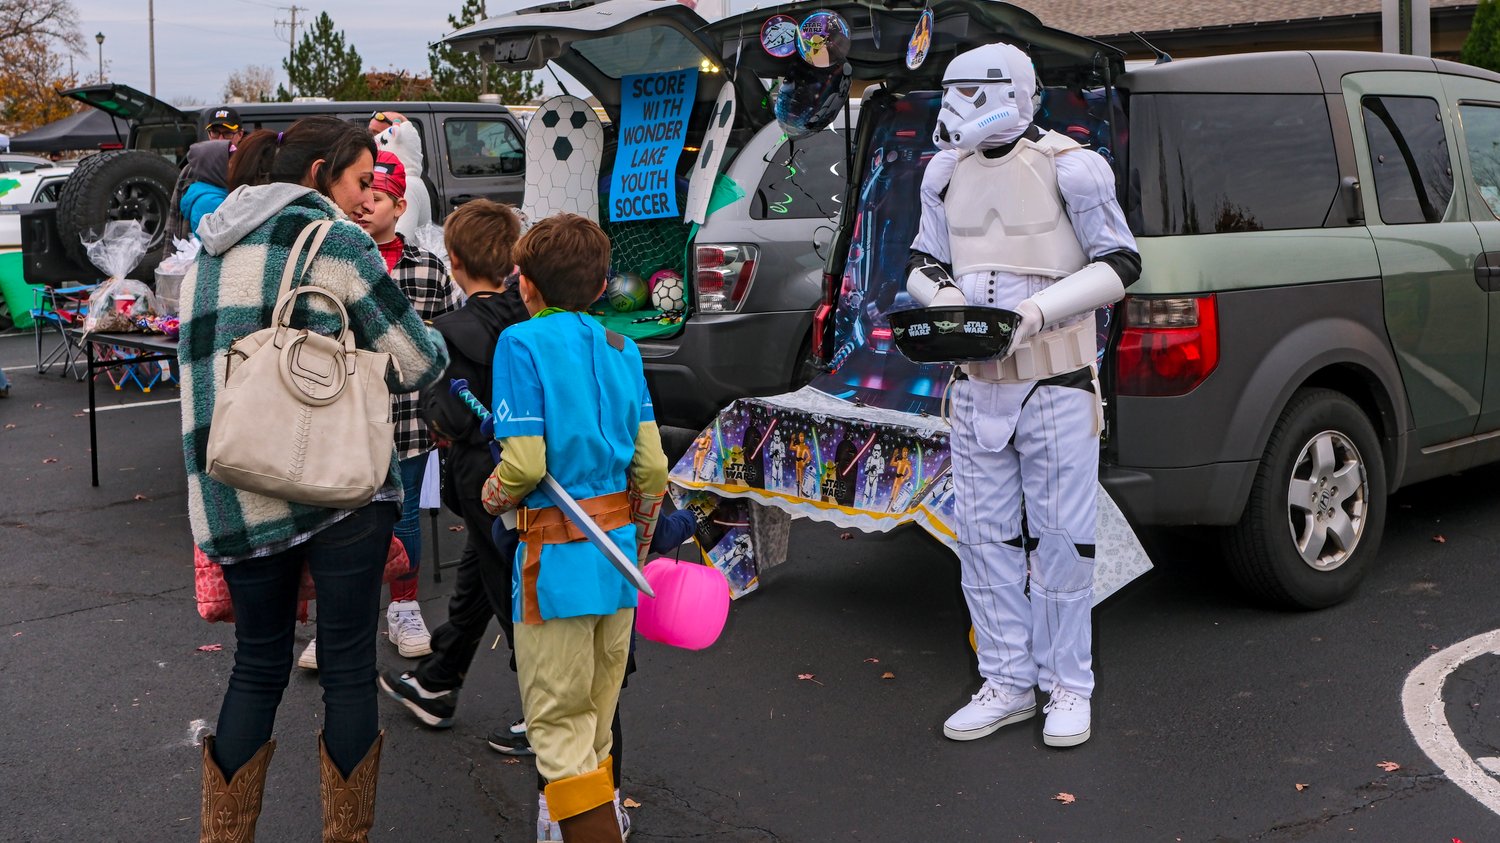 Stormtrooper handing out candy.